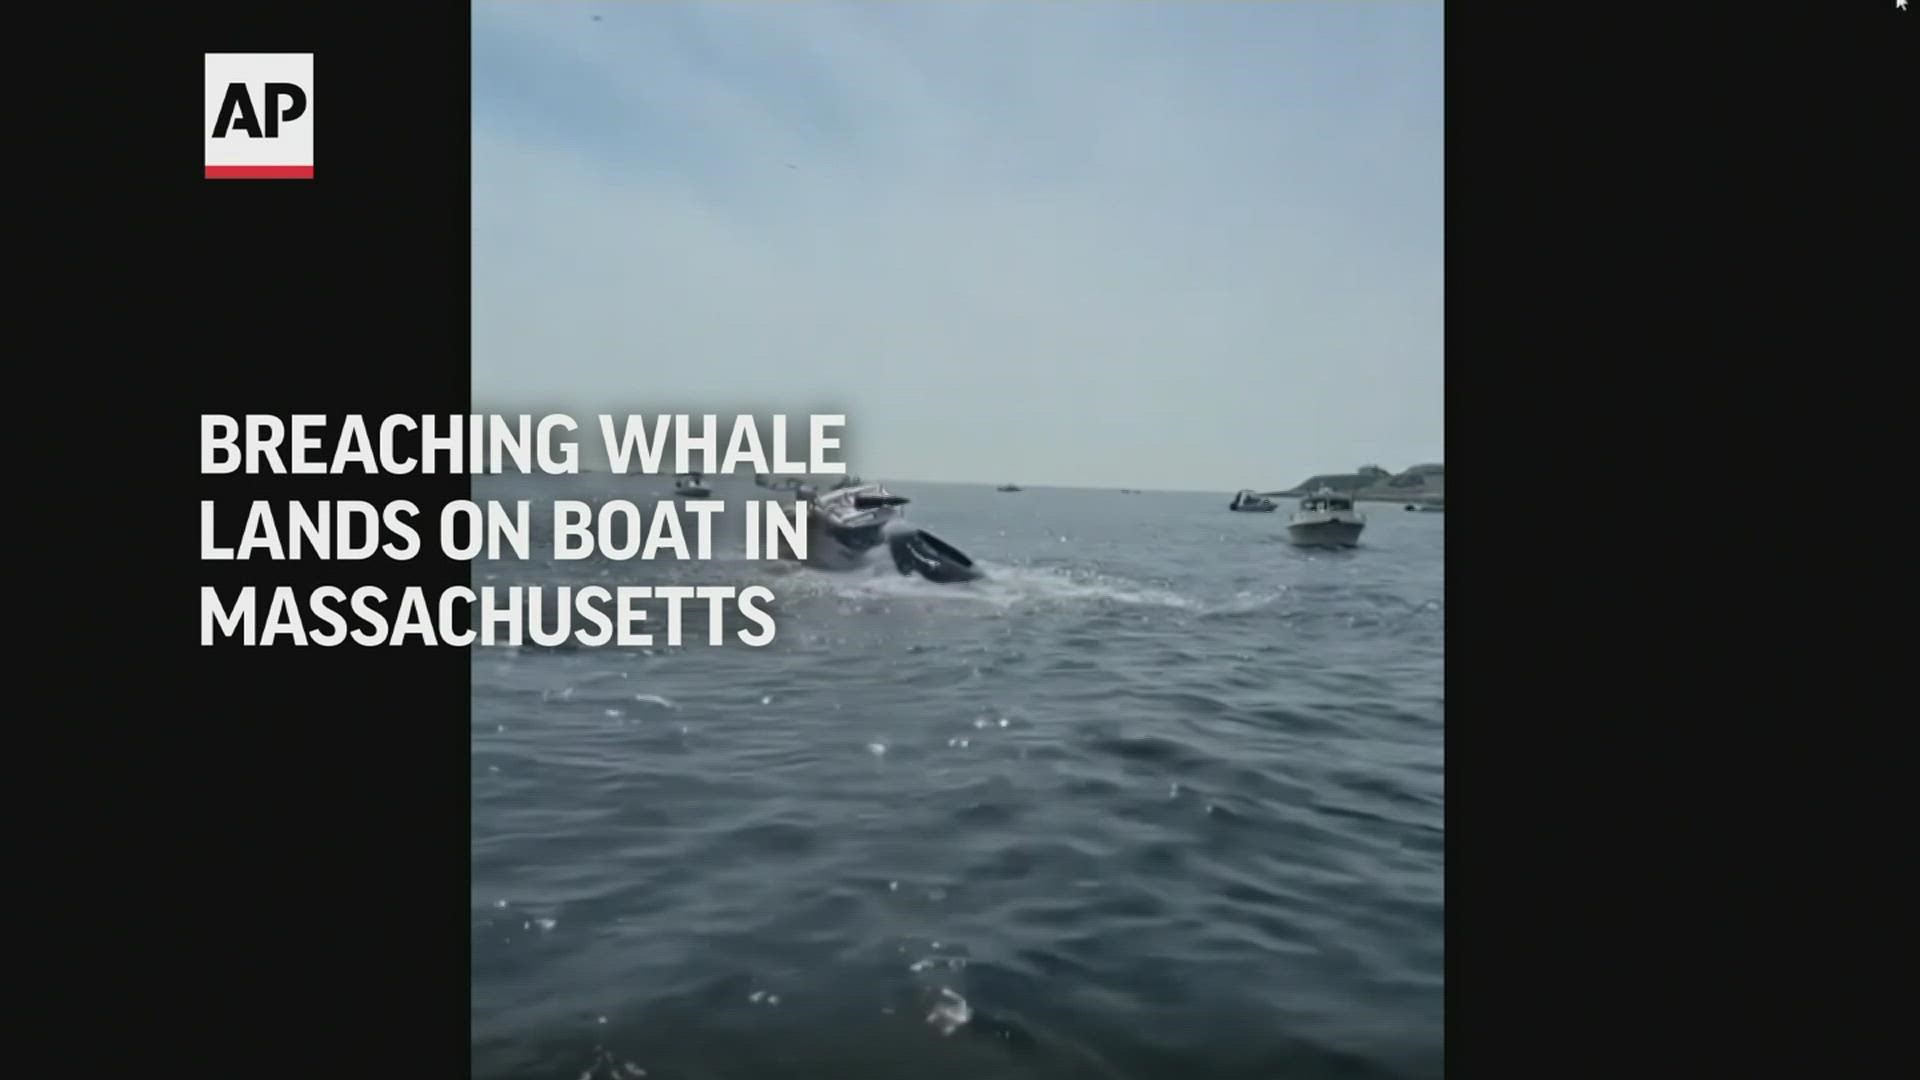 Tourists often take boat tours for a chance to glimpse humpback whales, but this was probably too close for comfort. Plymouth officials said no one was hurt.